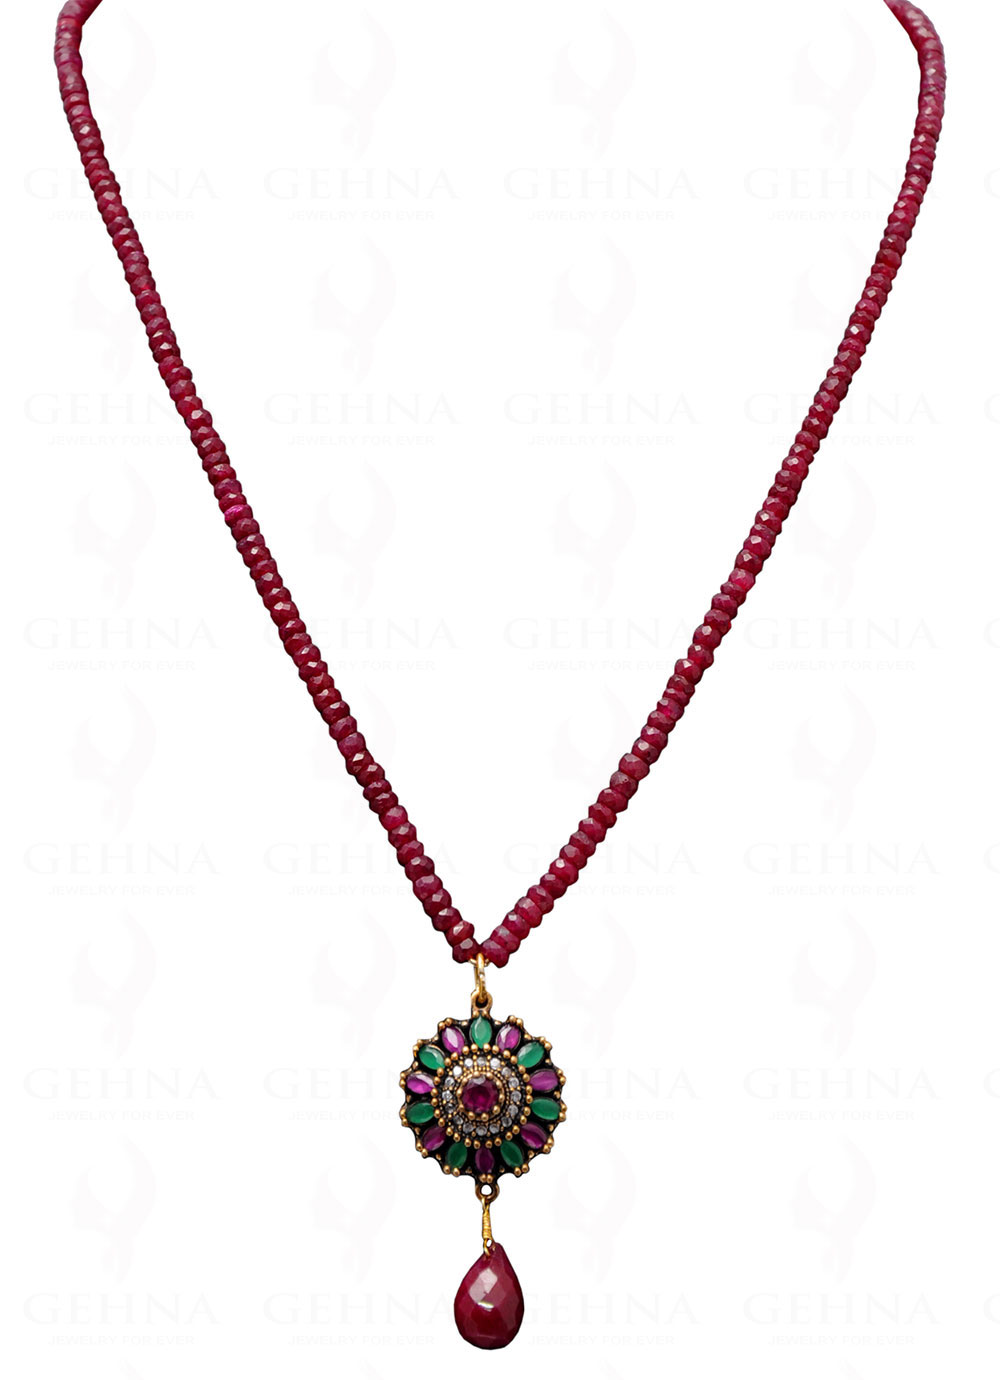 Burma Ruby Faceted Rondelle Necklace – TheGemSource